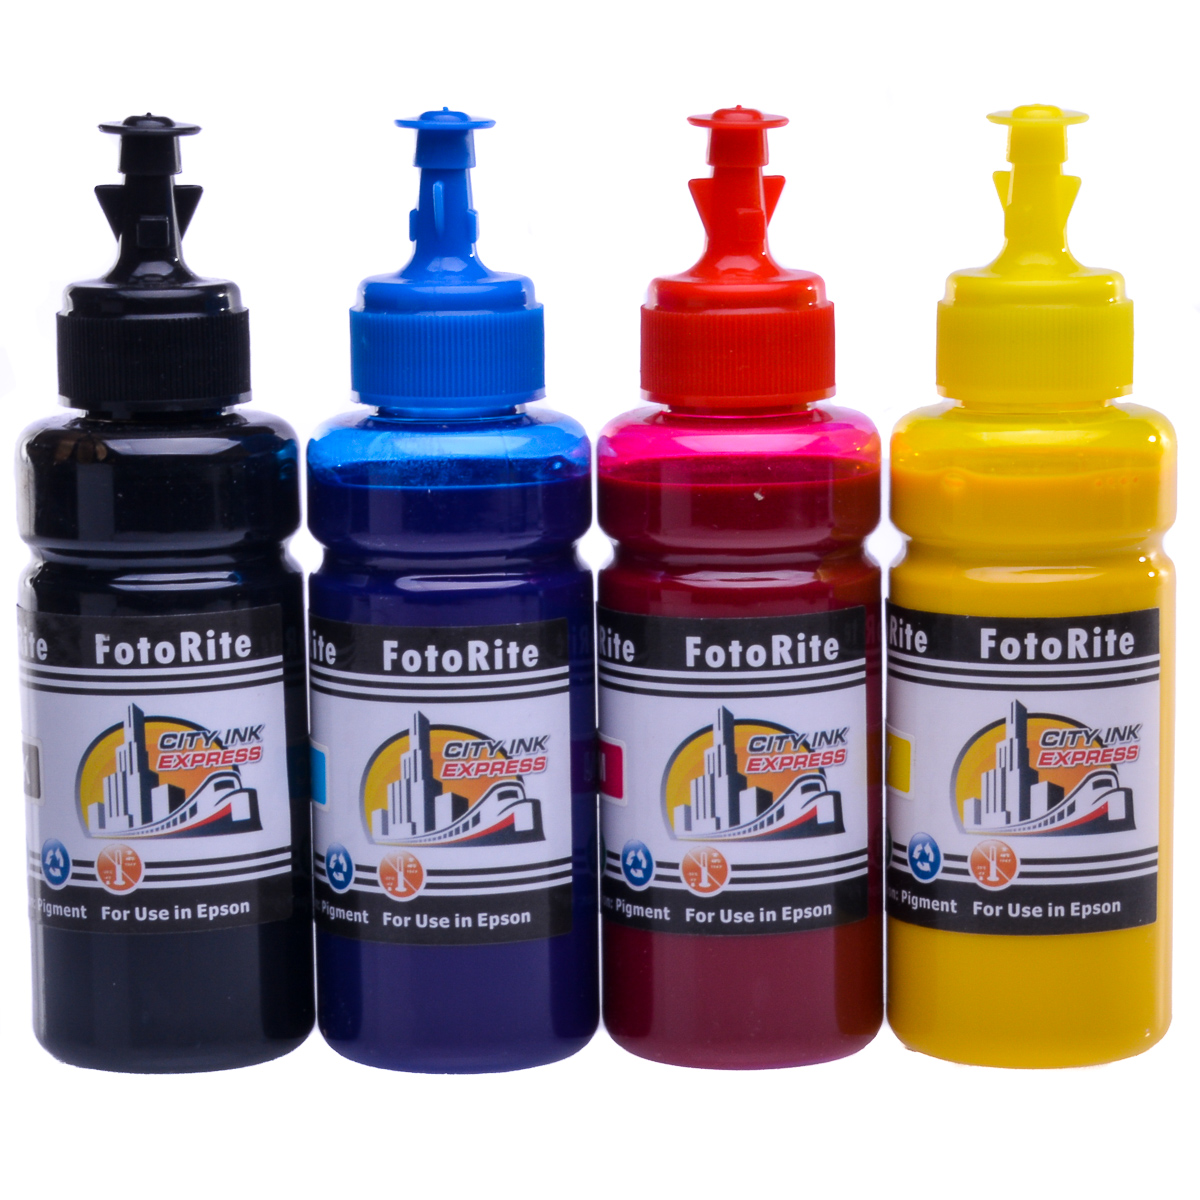 Cheap Multipack pigment ink refill replaces Epson WF-4730DWF